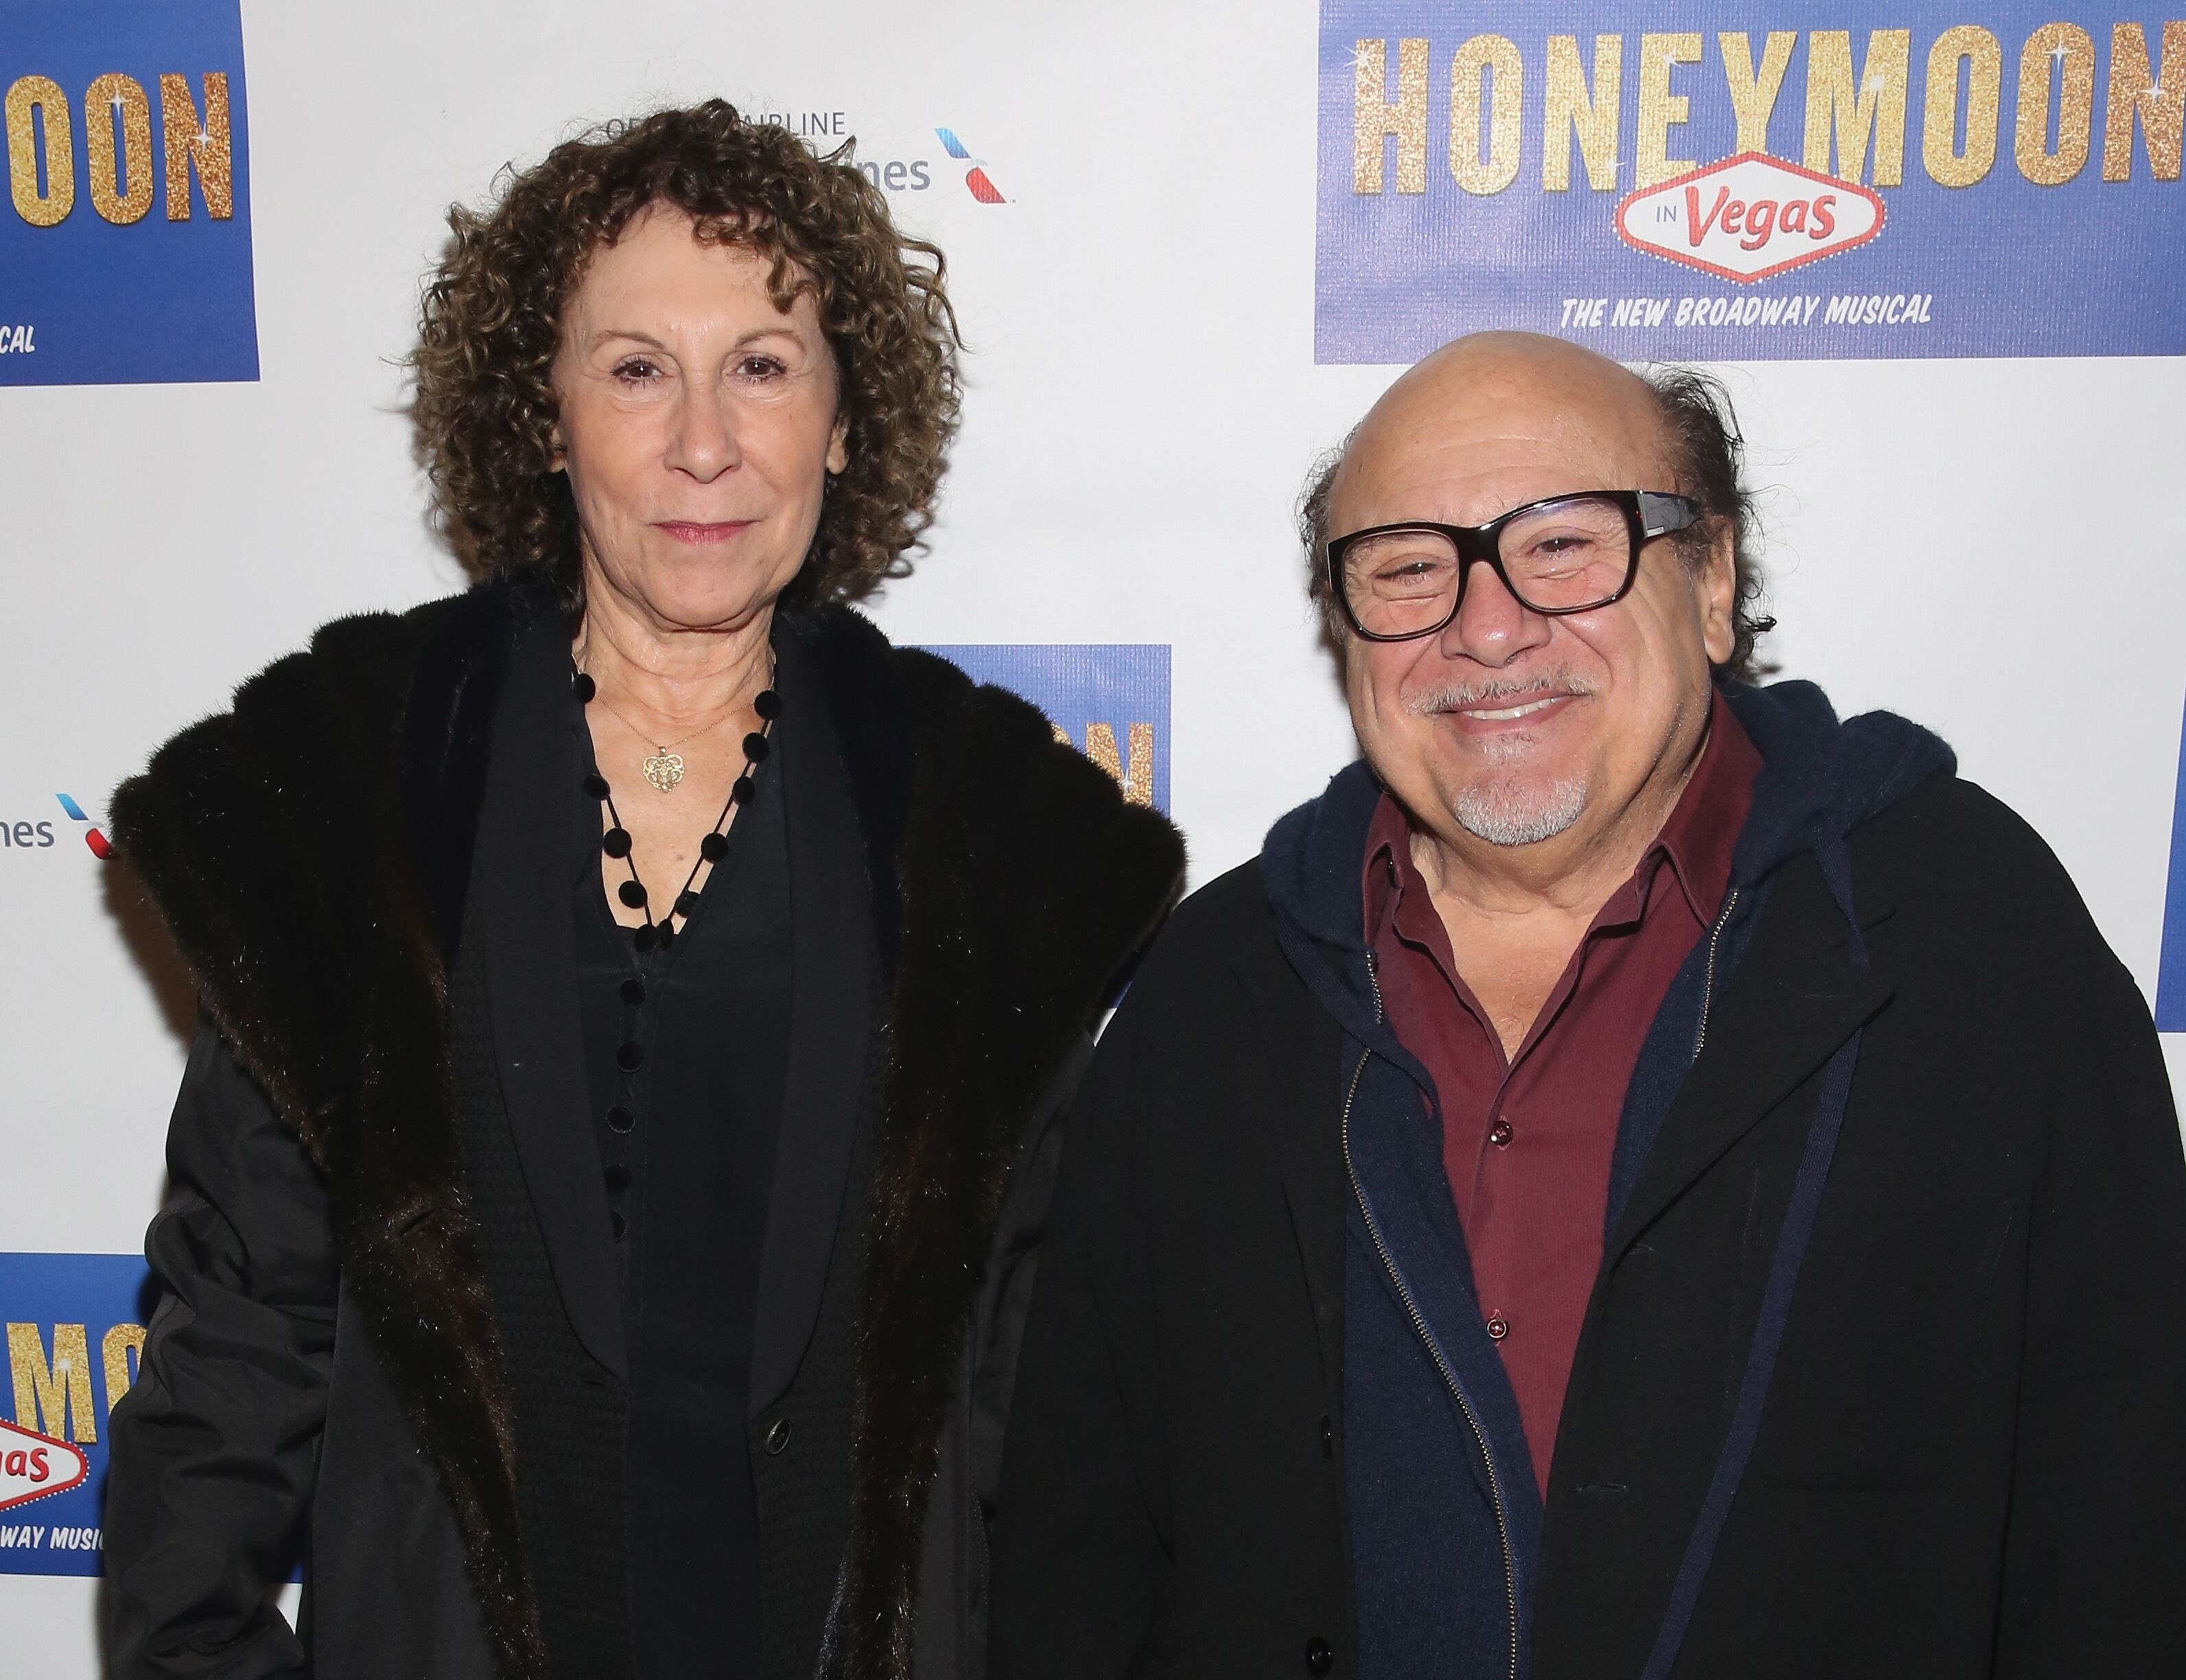 Rhea Pearlman and Danny DeVito attend "Honeymoon In Vegas" Broadway Opening Night. | Source: Getty Images